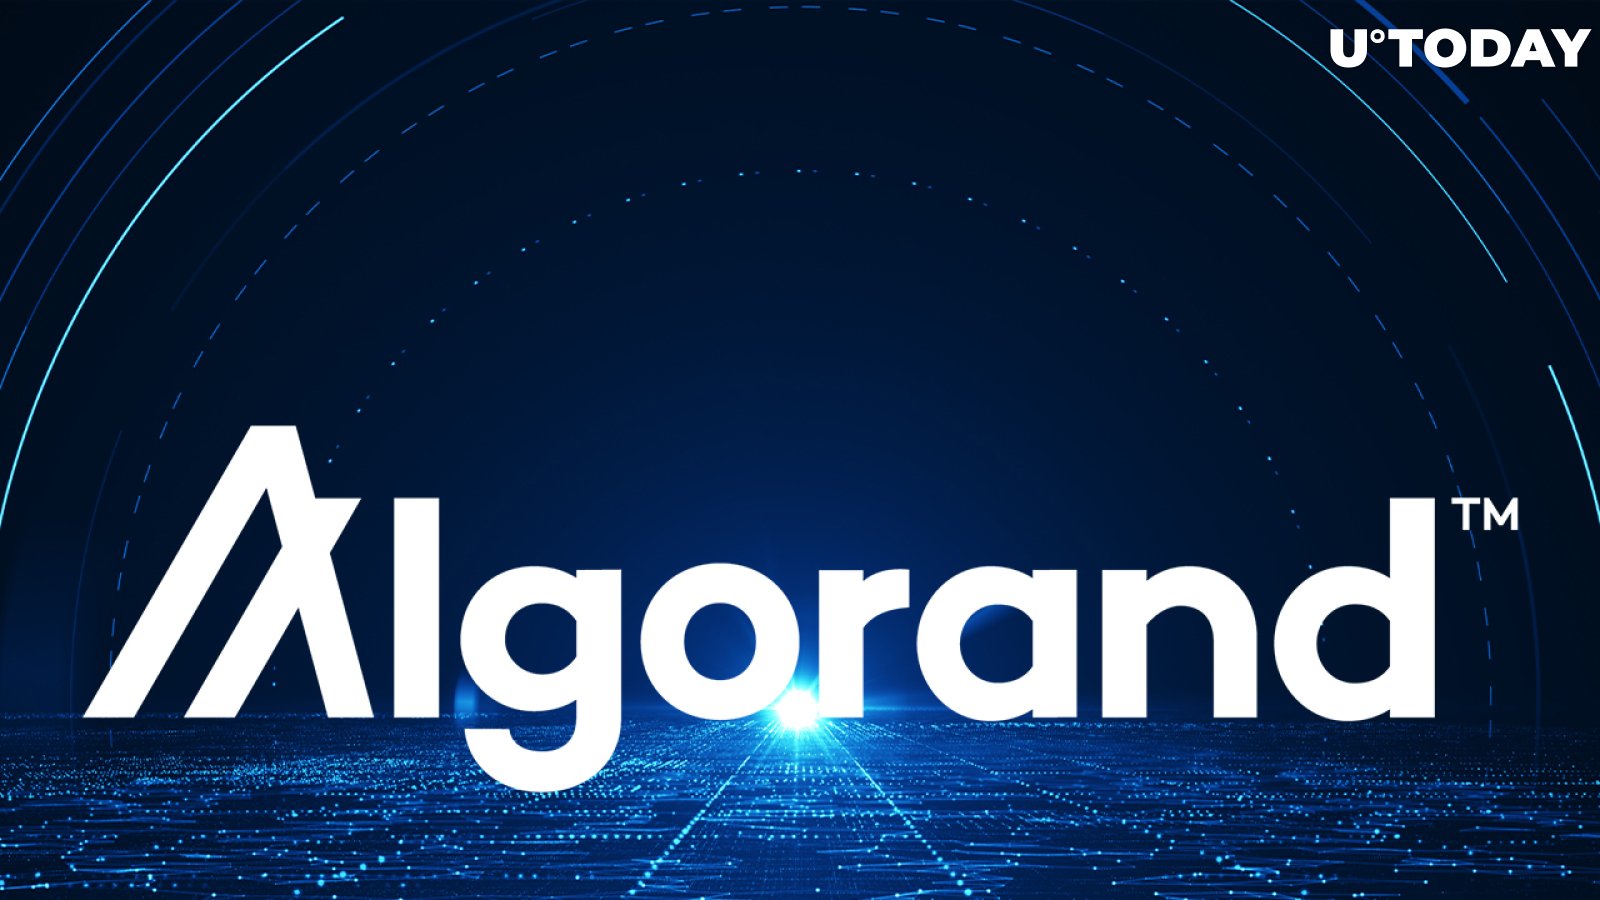 Algorand Launches First Smart Contract to Offset Carbon Emissions: Details